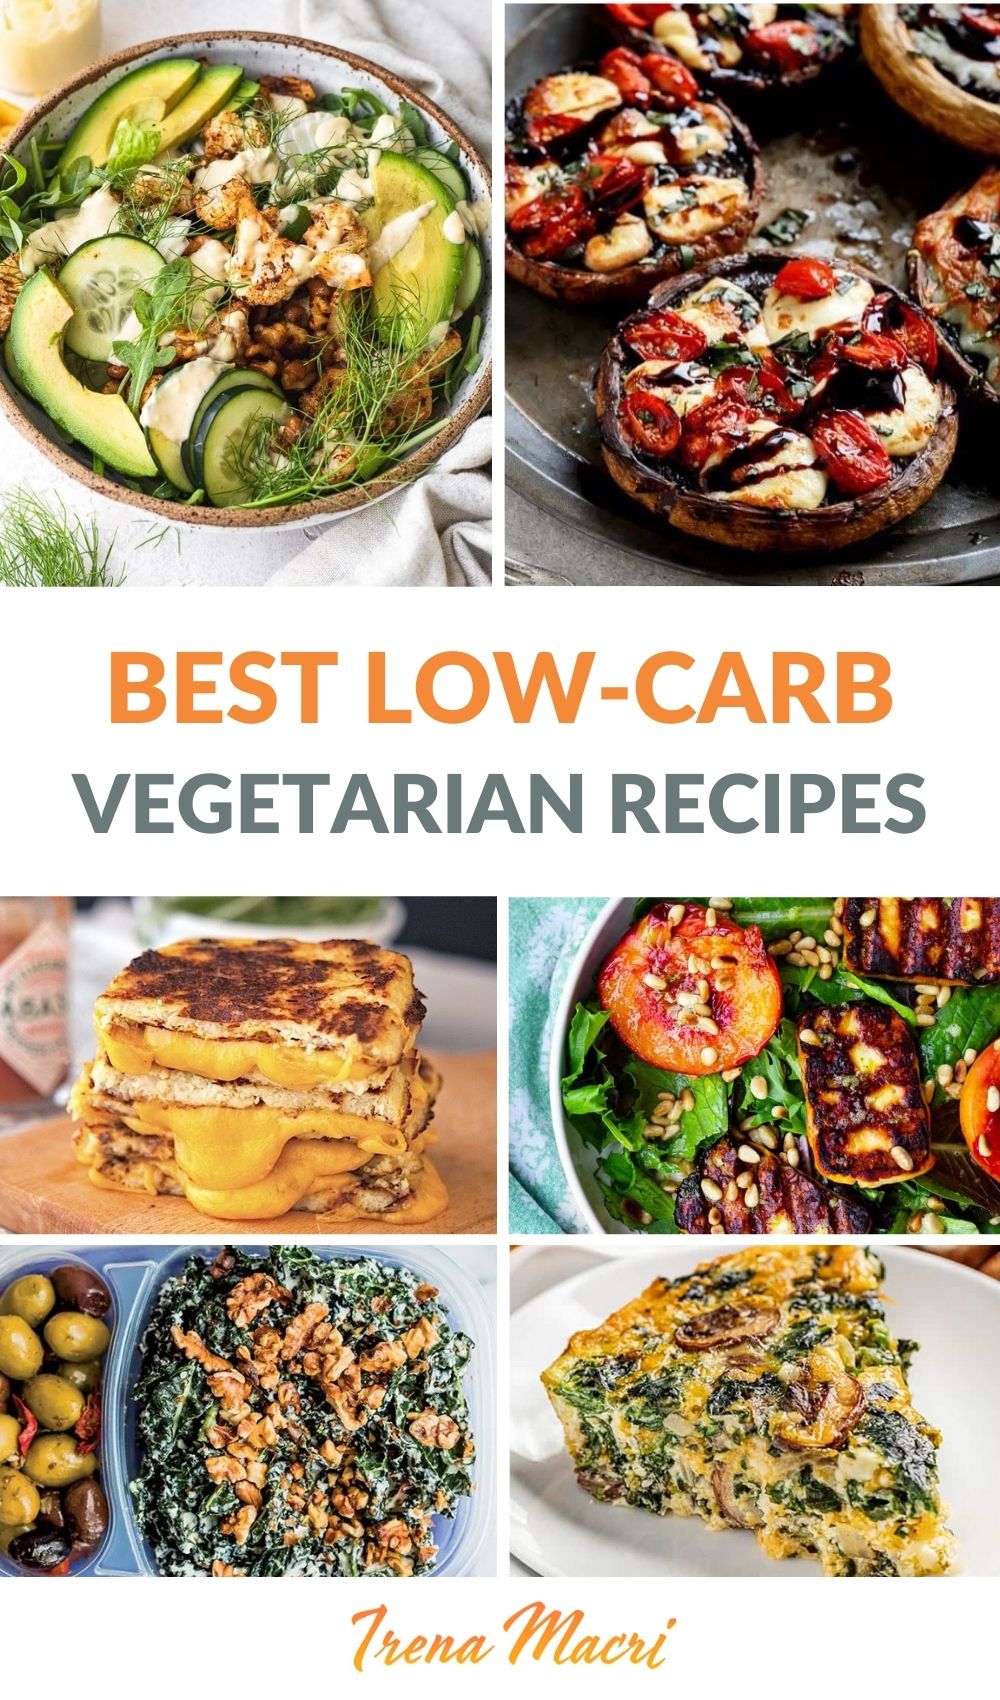 29 Low-Carb Vegetarian Recipes (Breakfast, Lunch & Dinners)